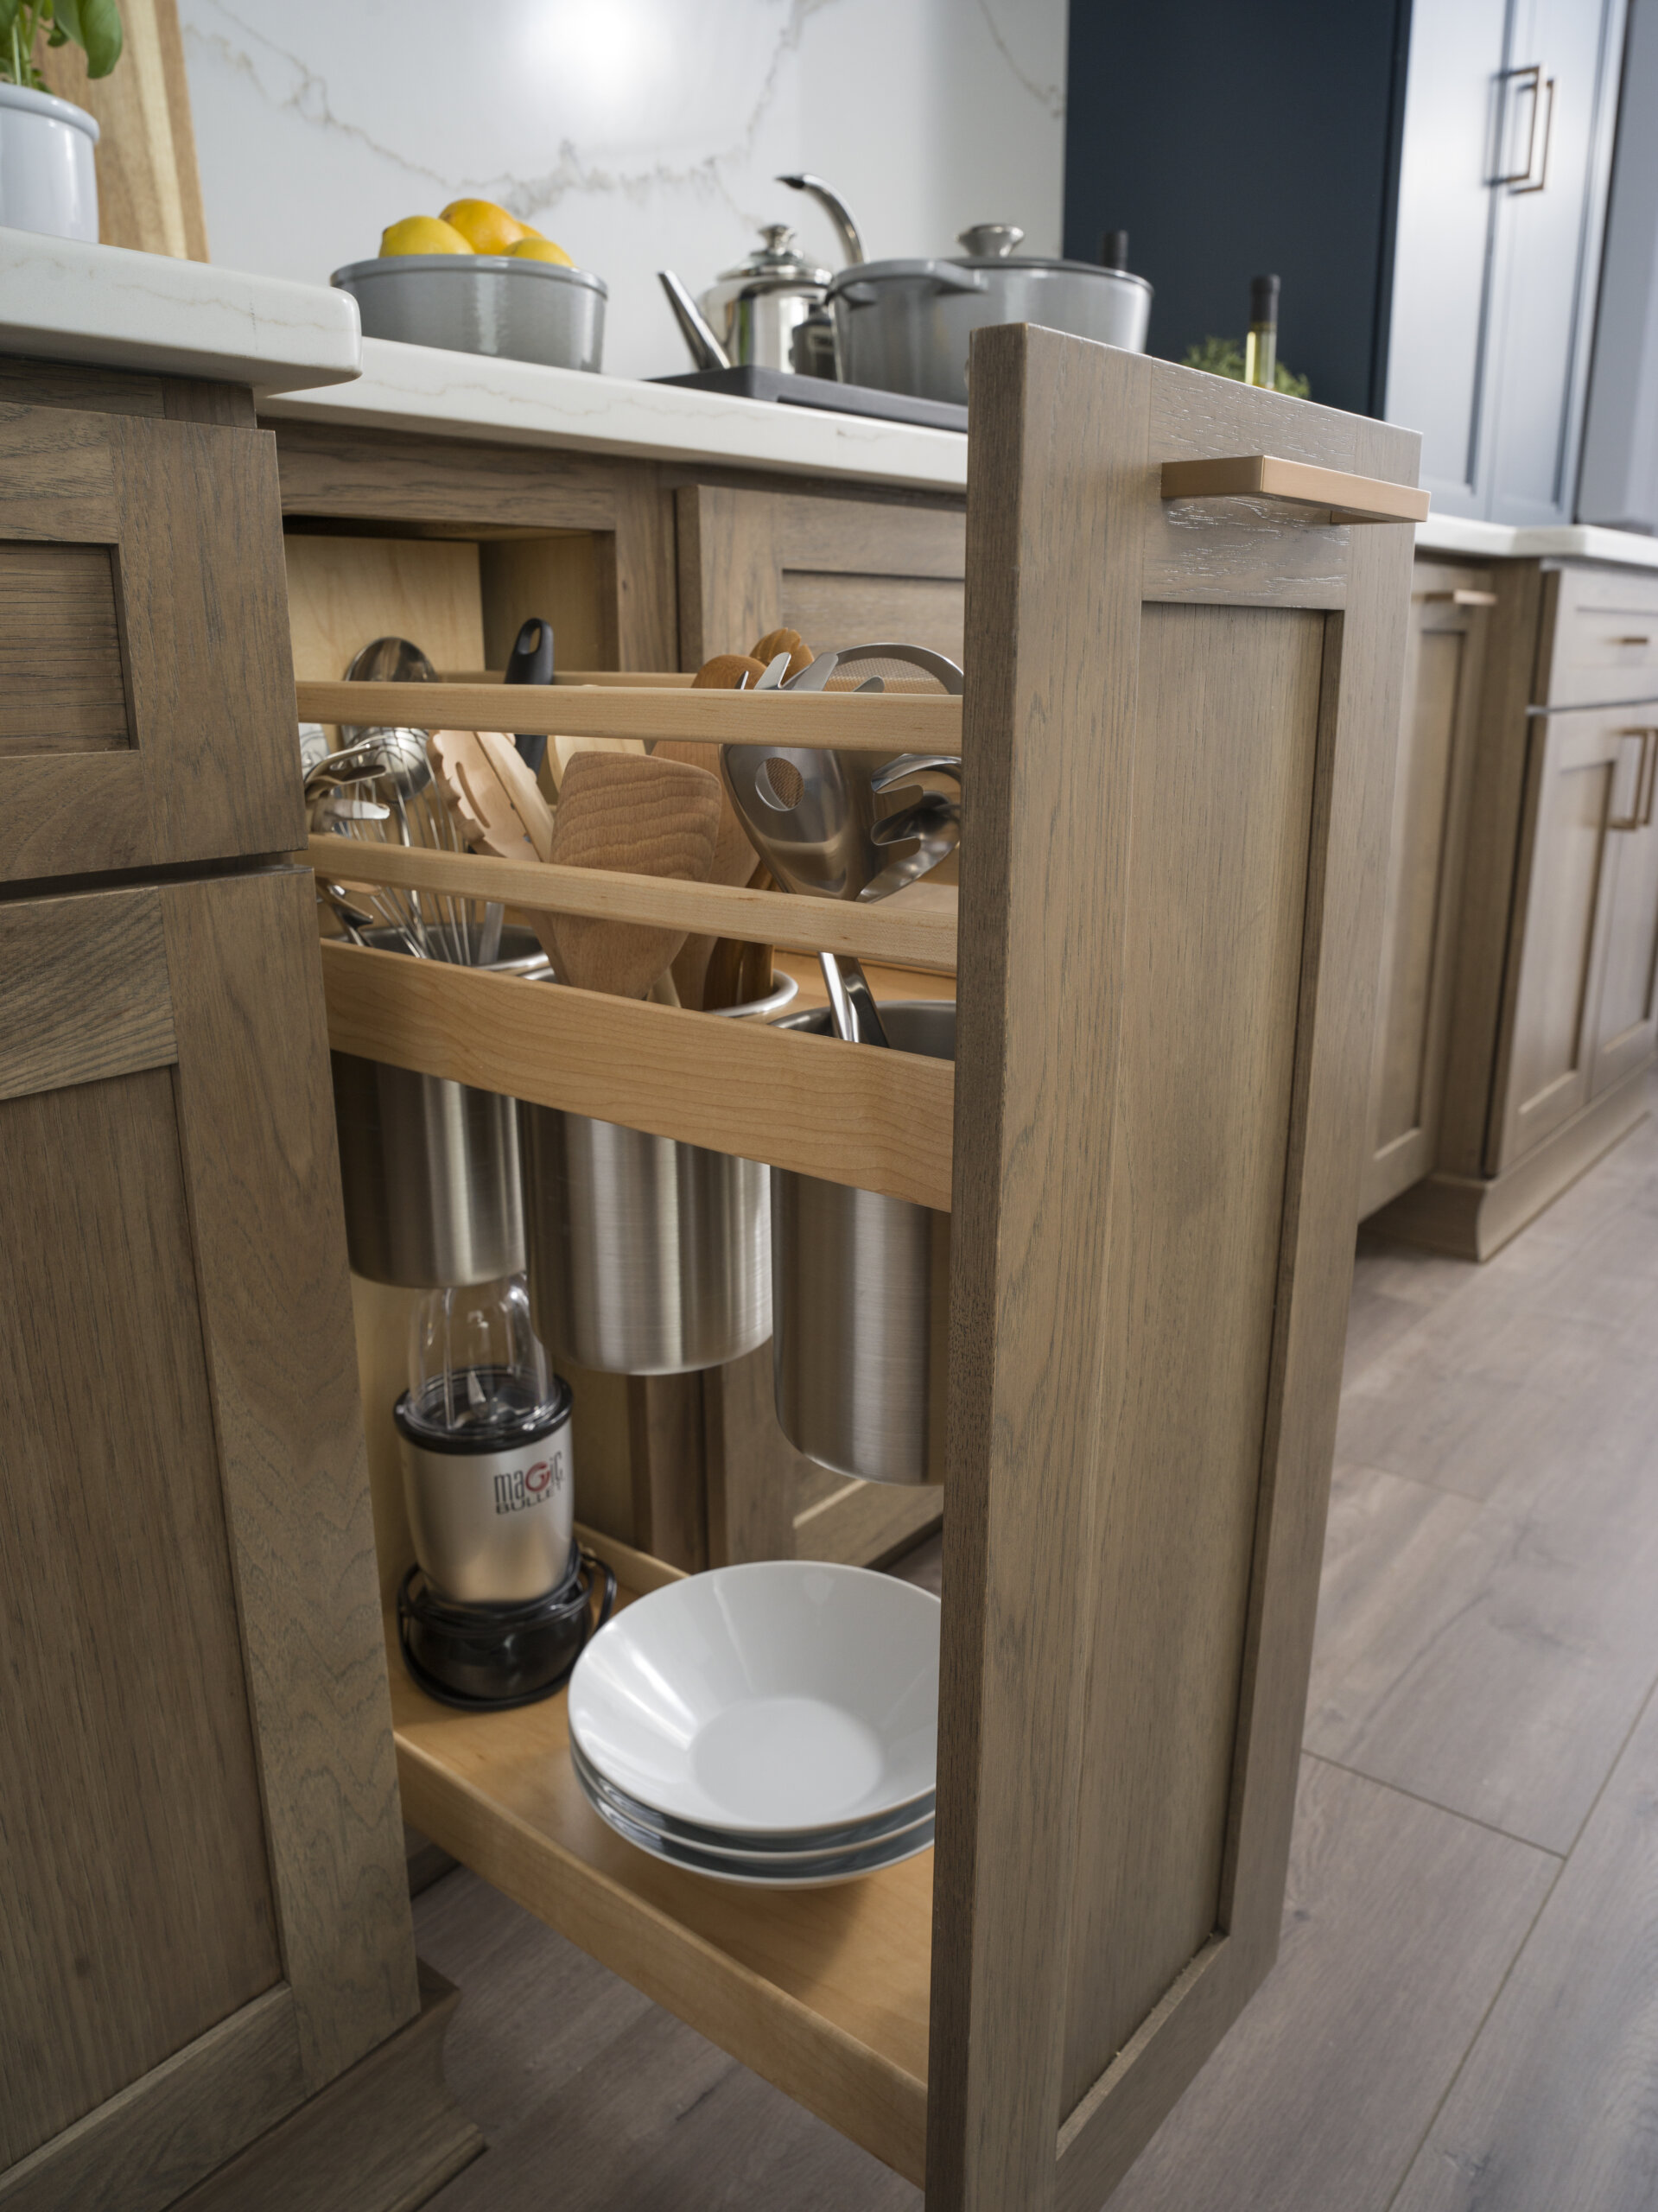 Base Tray Cabinet - Dura Supreme Cabinetry